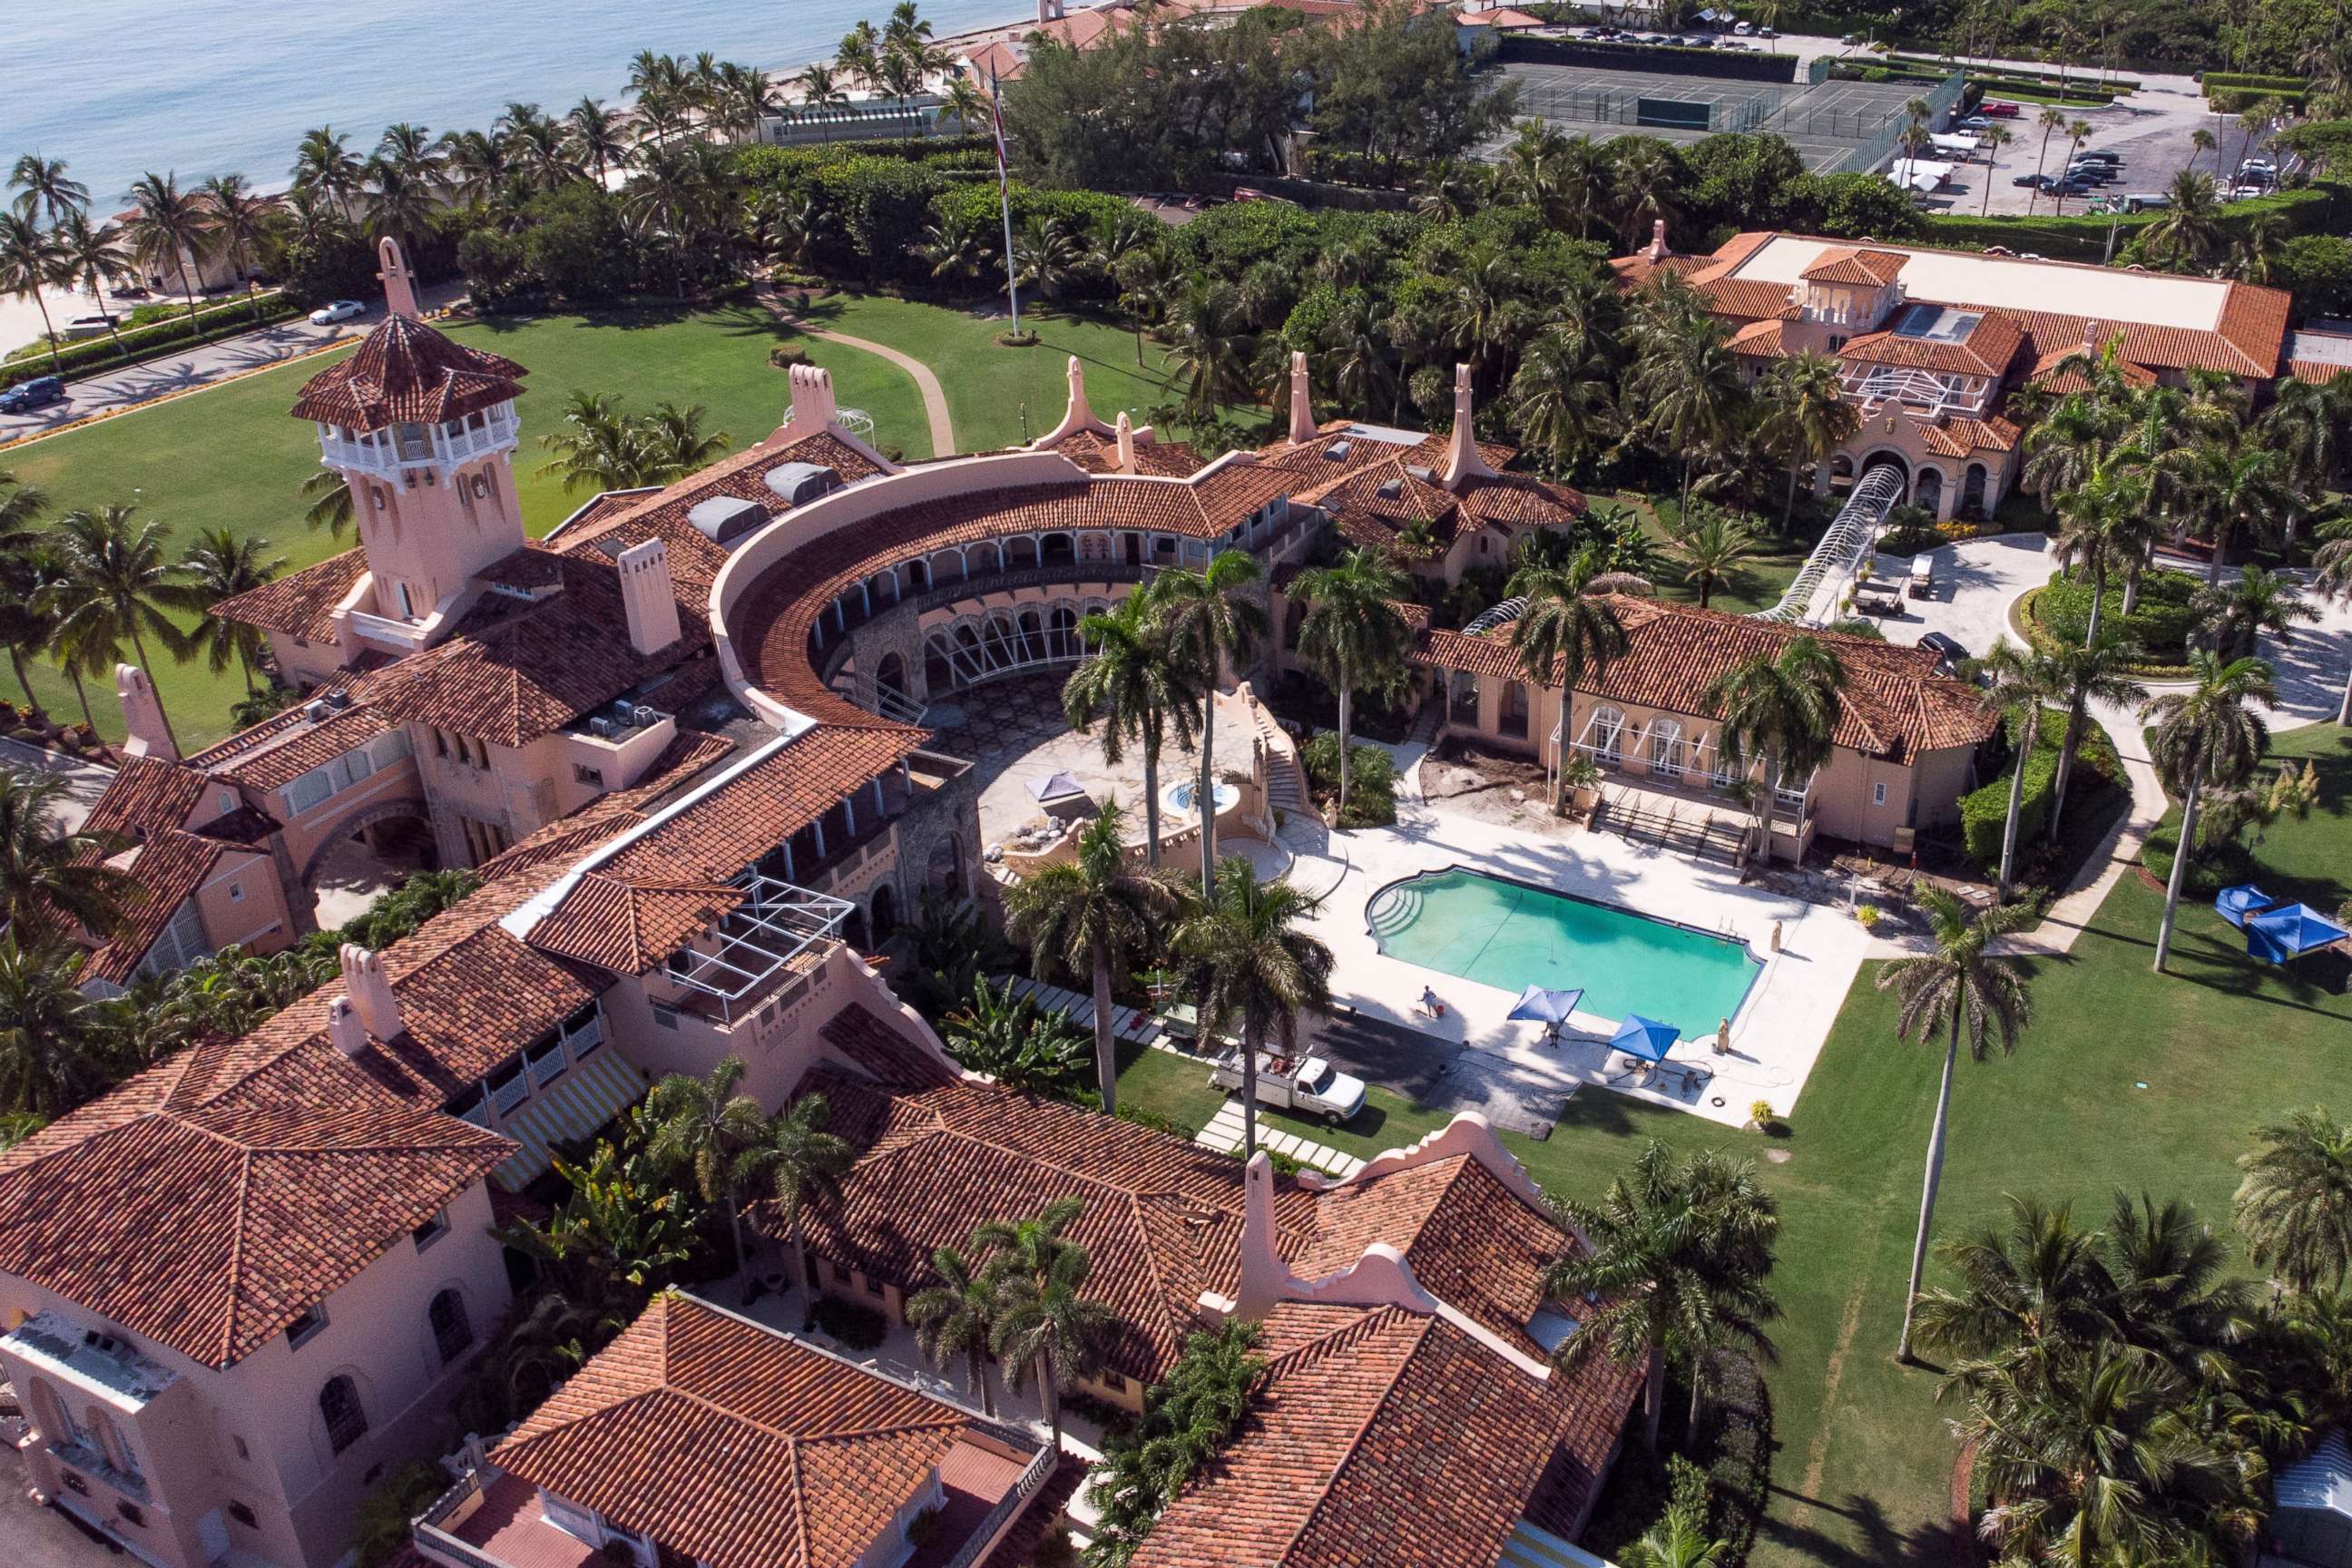 PHOTO: In this Aug. 15, 2022, file photo, former President Donald Trump's Mar-a-Lago home is shown in Palm Beach, Fla.